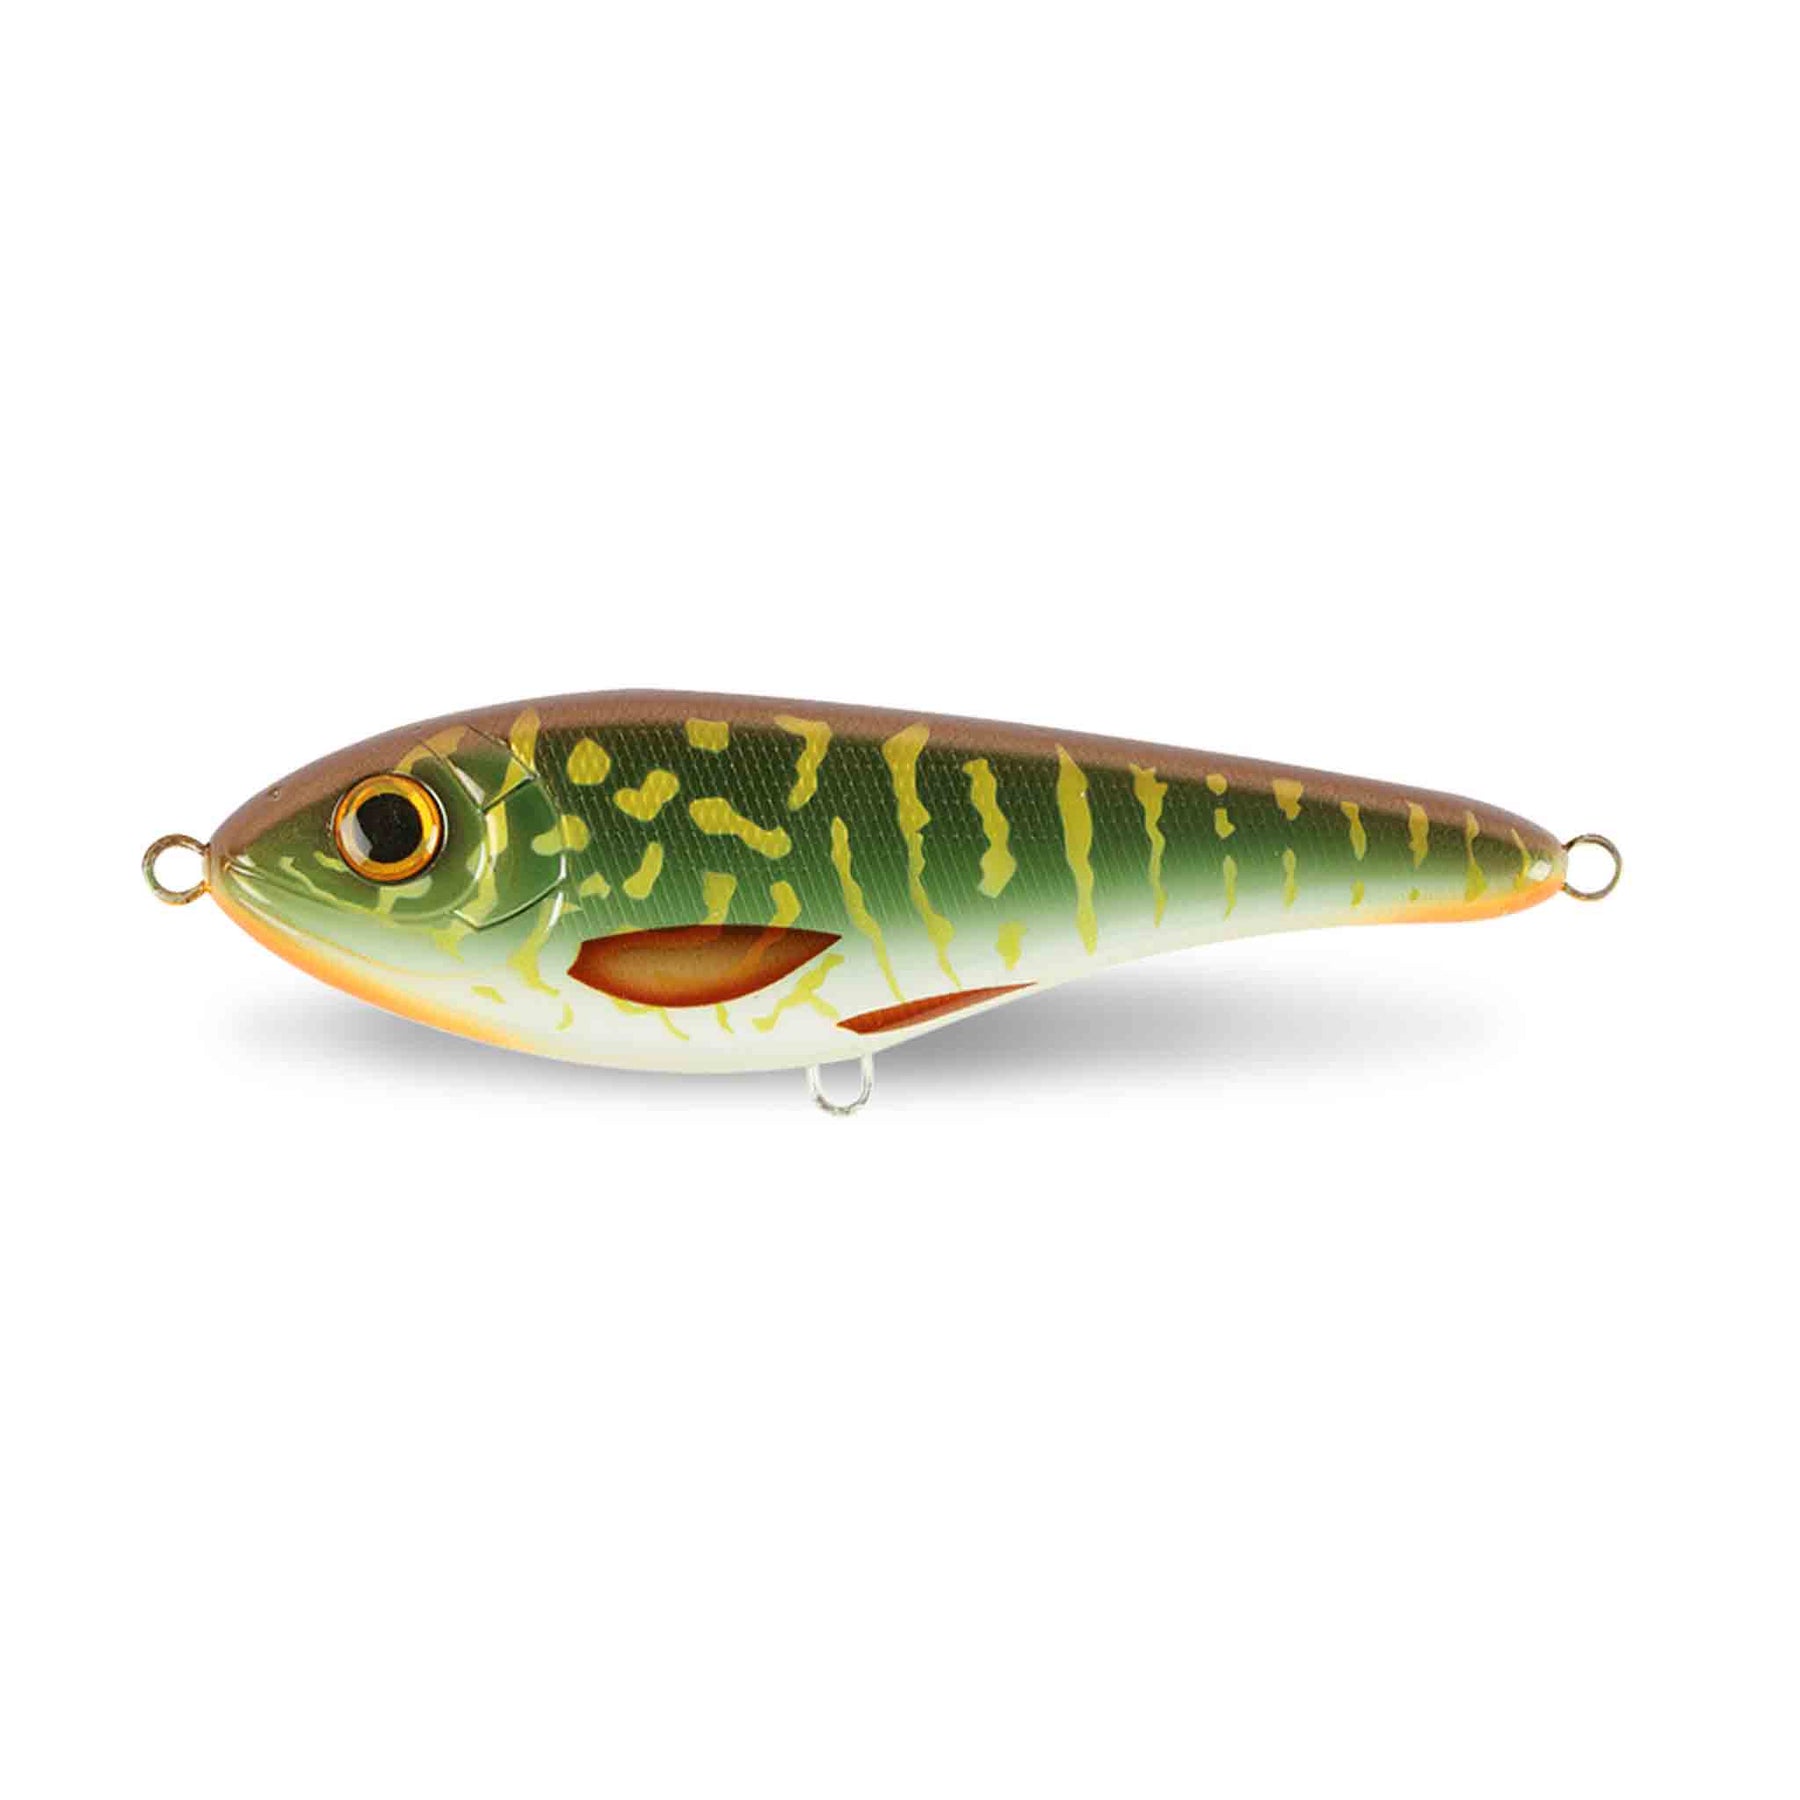 View of Jerk-Glide_Baits Strike Pro Buster Jerk Sinking Glide Bait Special Pike available at EZOKO Pike and Musky Shop